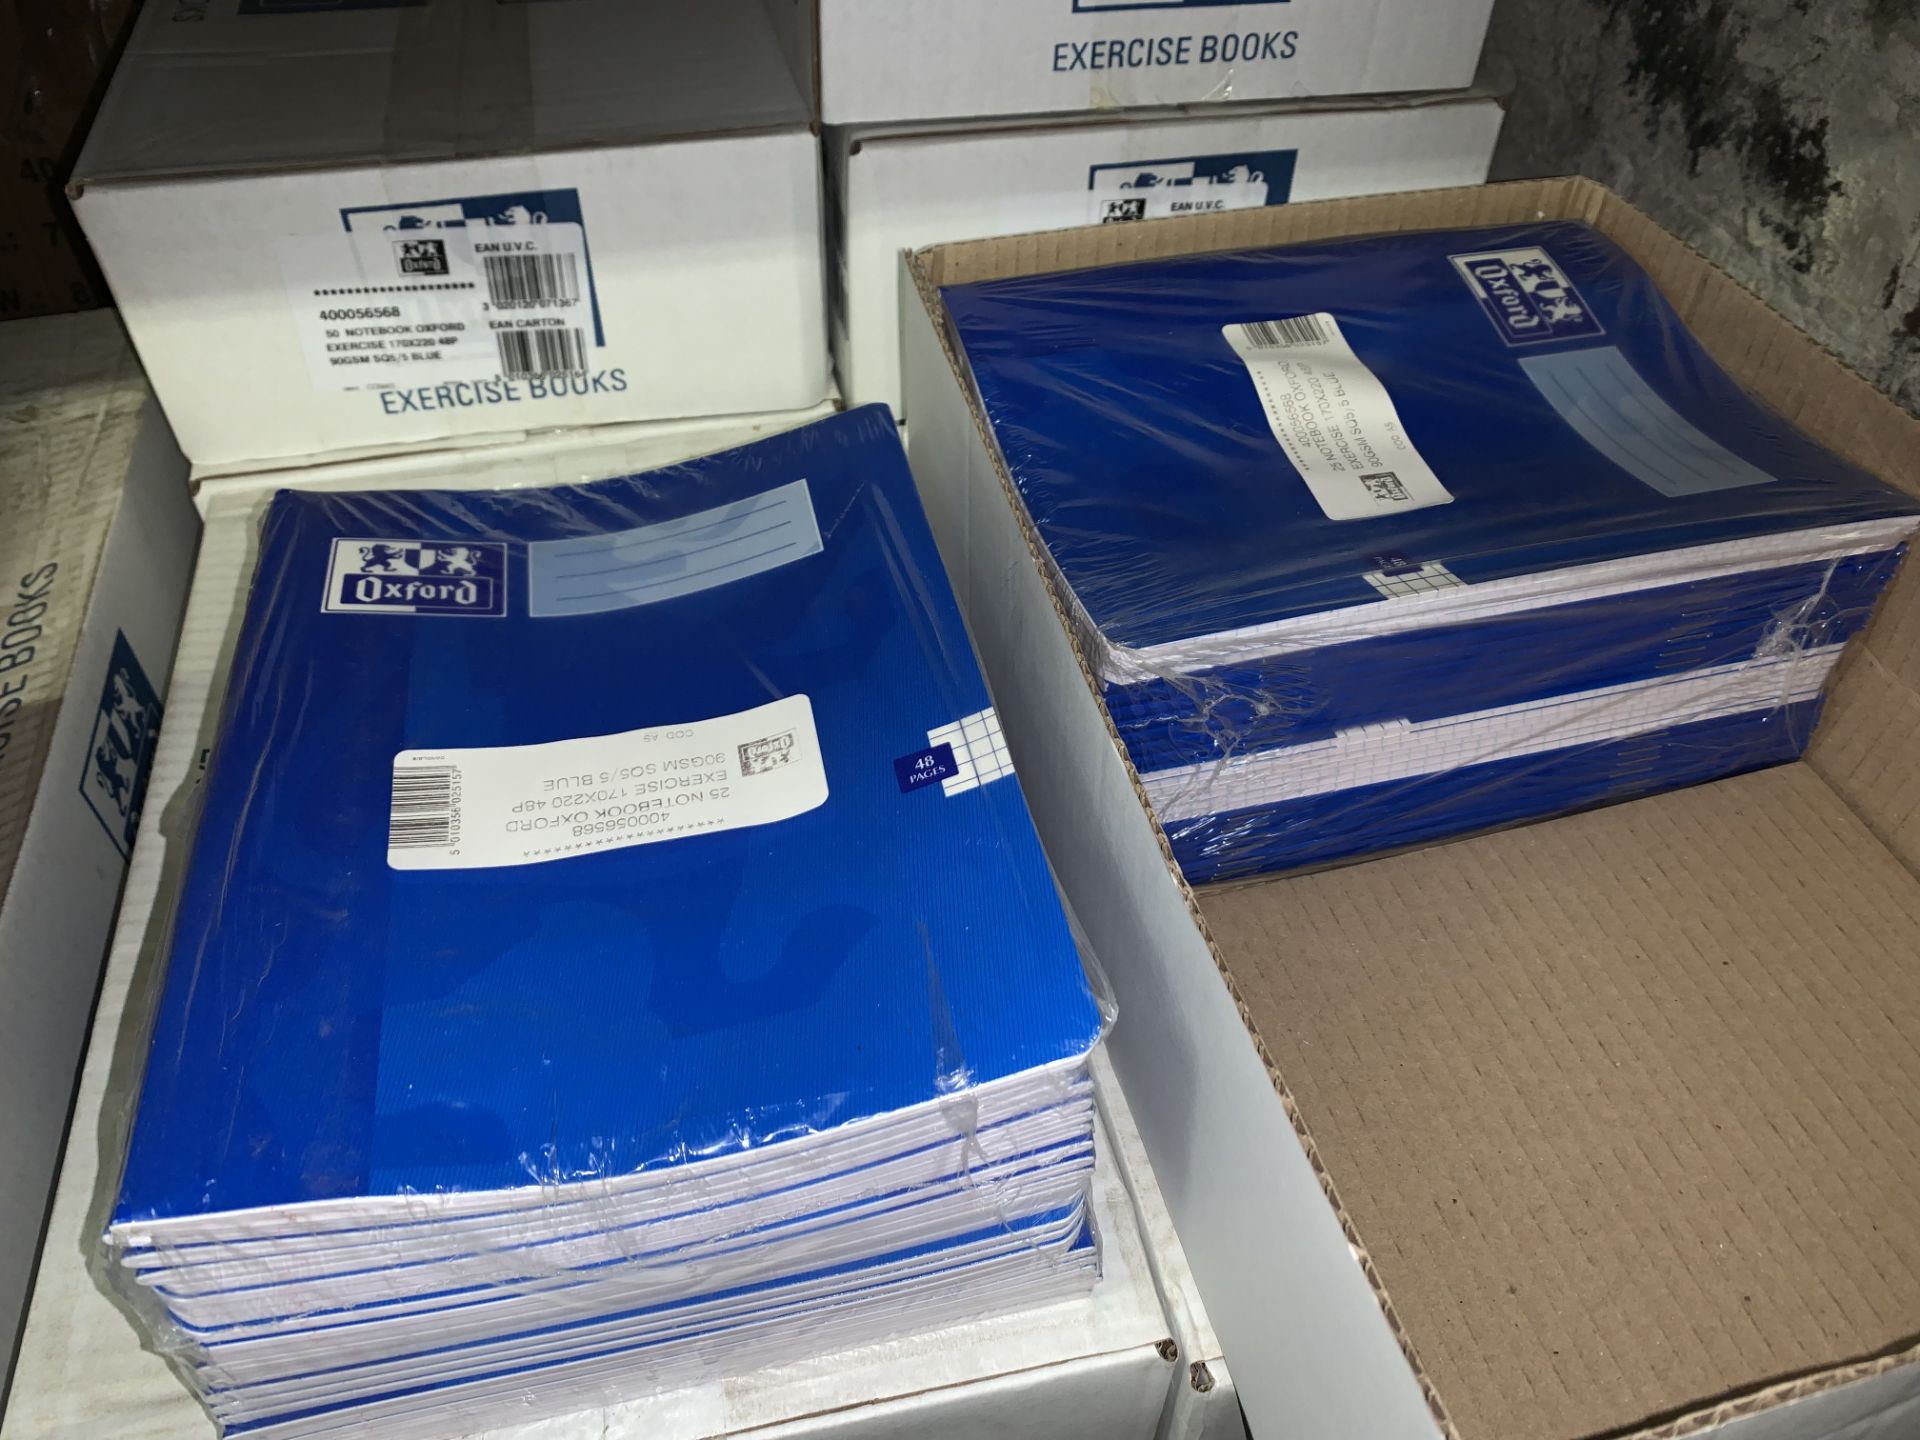 200 X BRAND NEW OXFORD BLUE 48 PAGE EXERCISE BOOKS